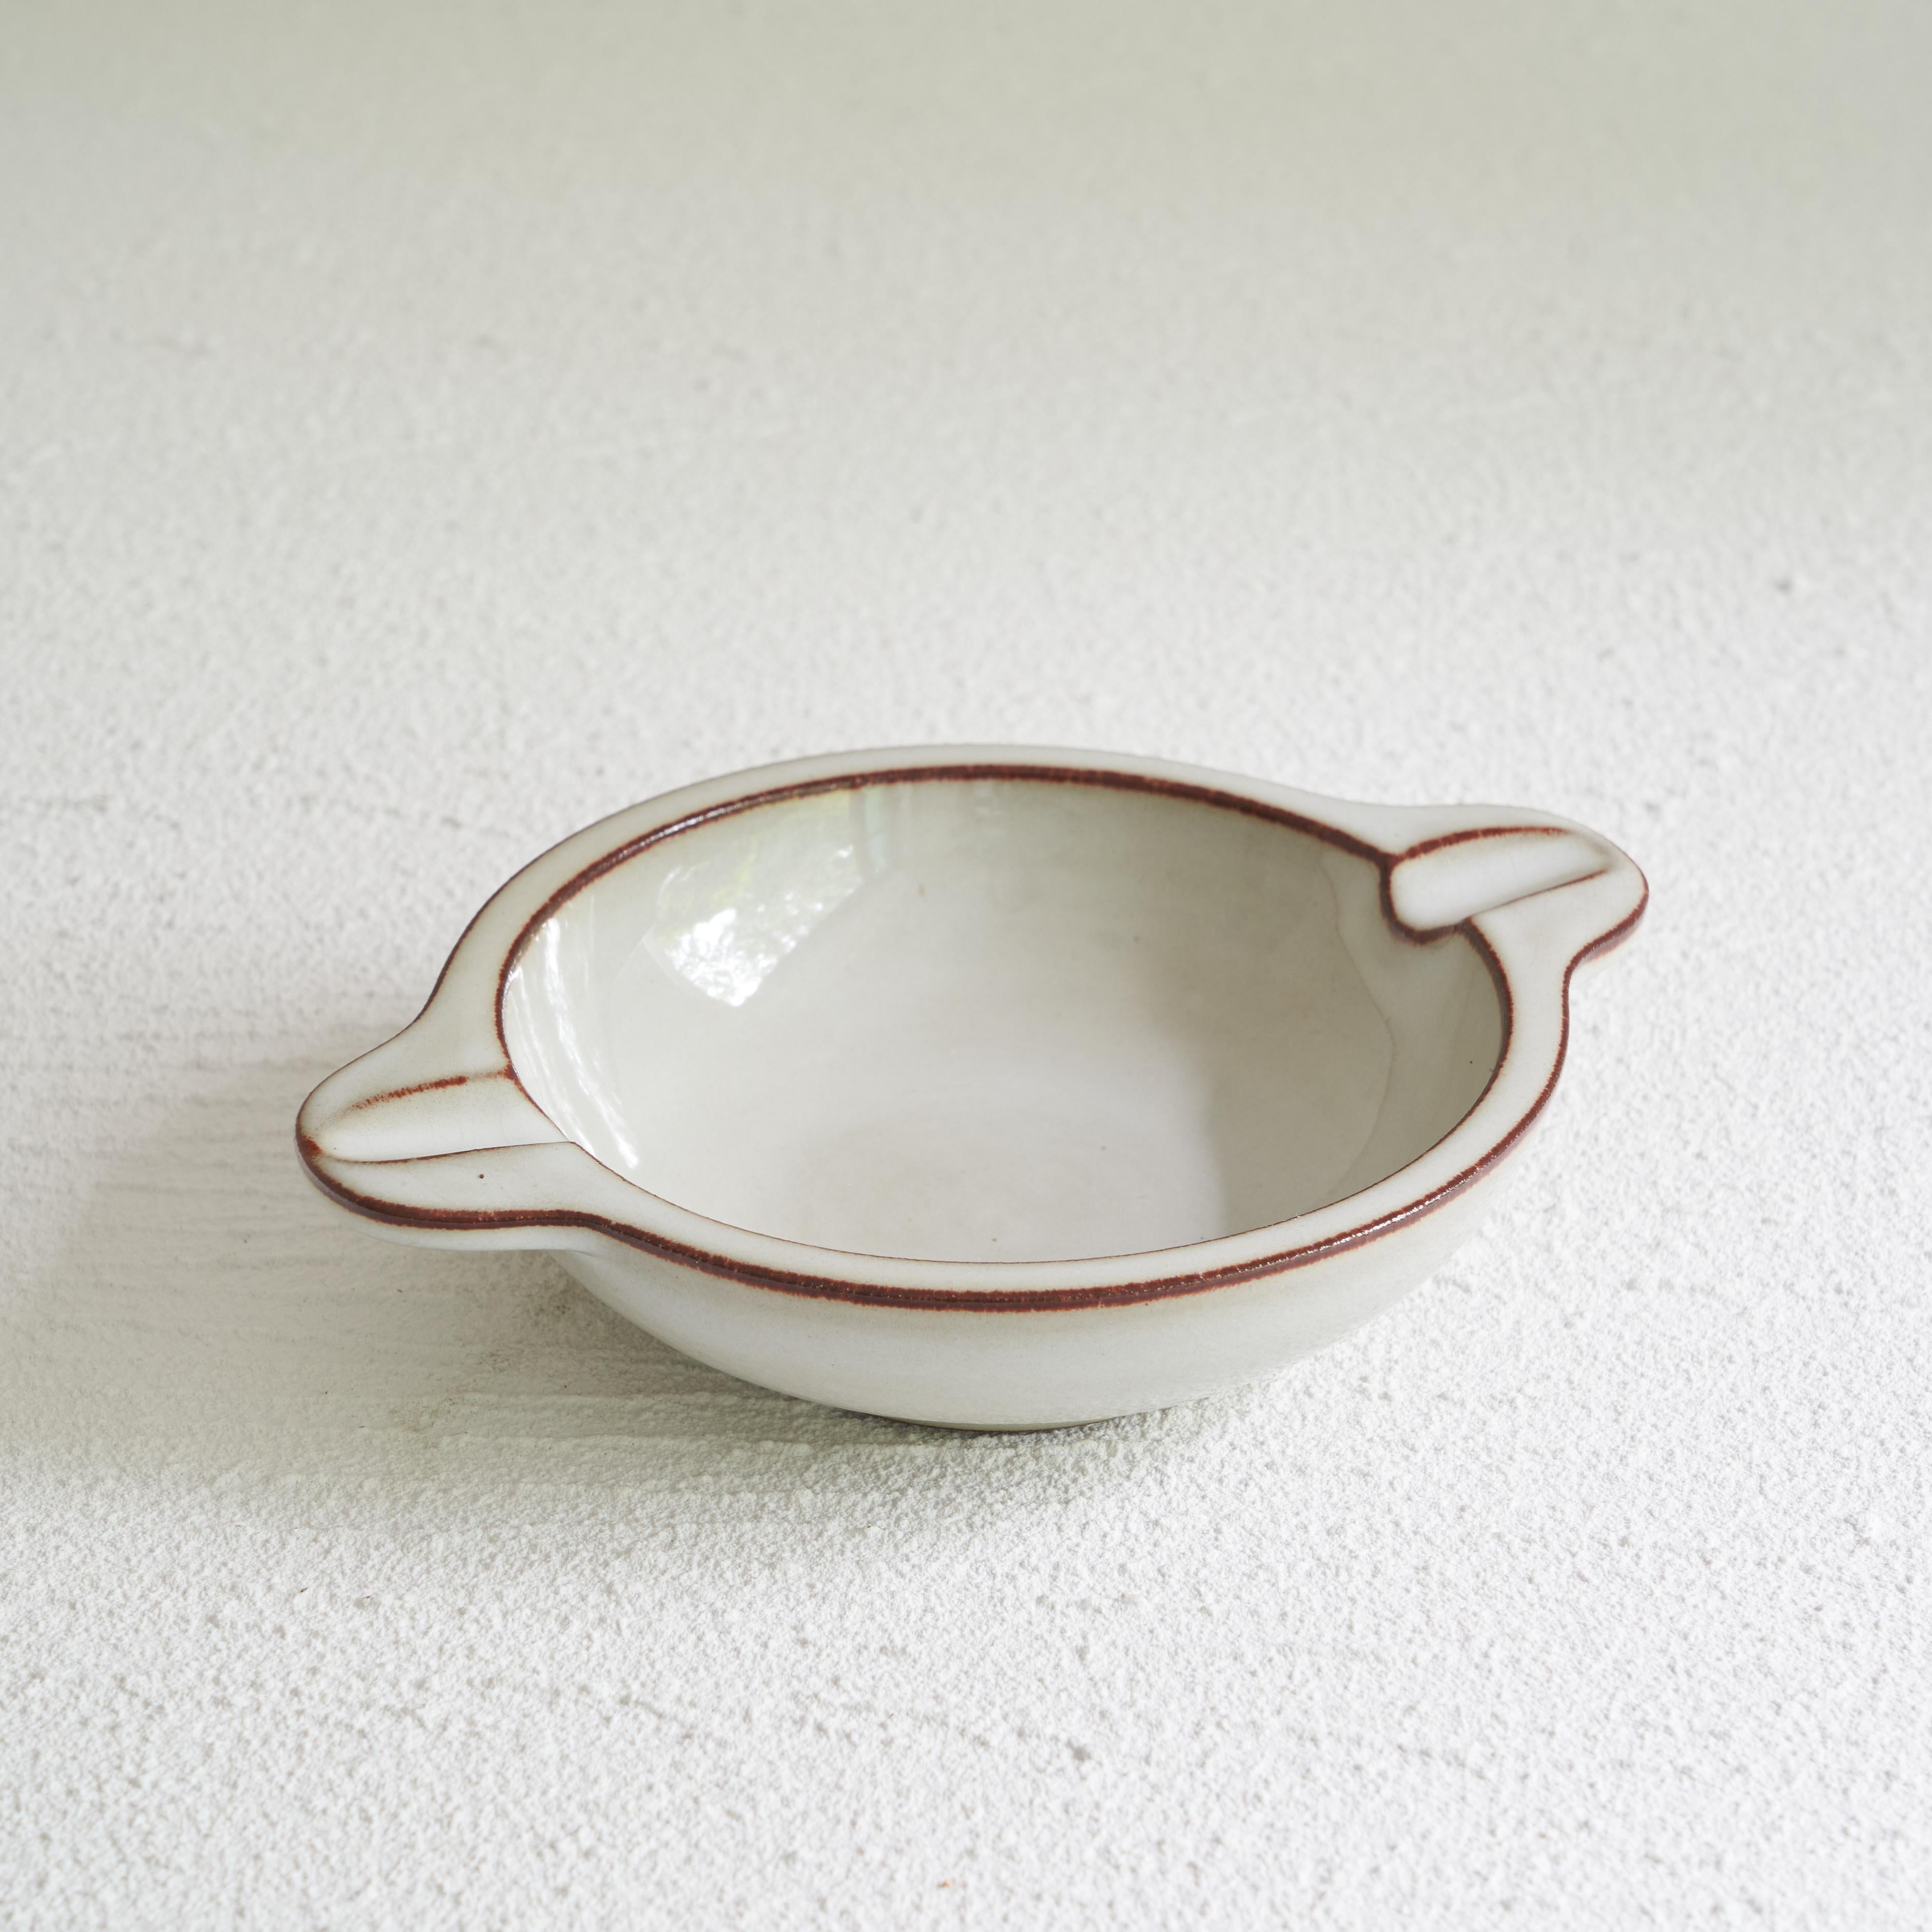 Midcentury Vide Poche by Fris Edam, The Netherlands, 1950s.

Wonderful little bowl / vide poche / ashtray by the famous modernist Fris workshop. Clear lines, Fine glazing and a distinct midcentury design.

This ceramic piece was made at the Fris